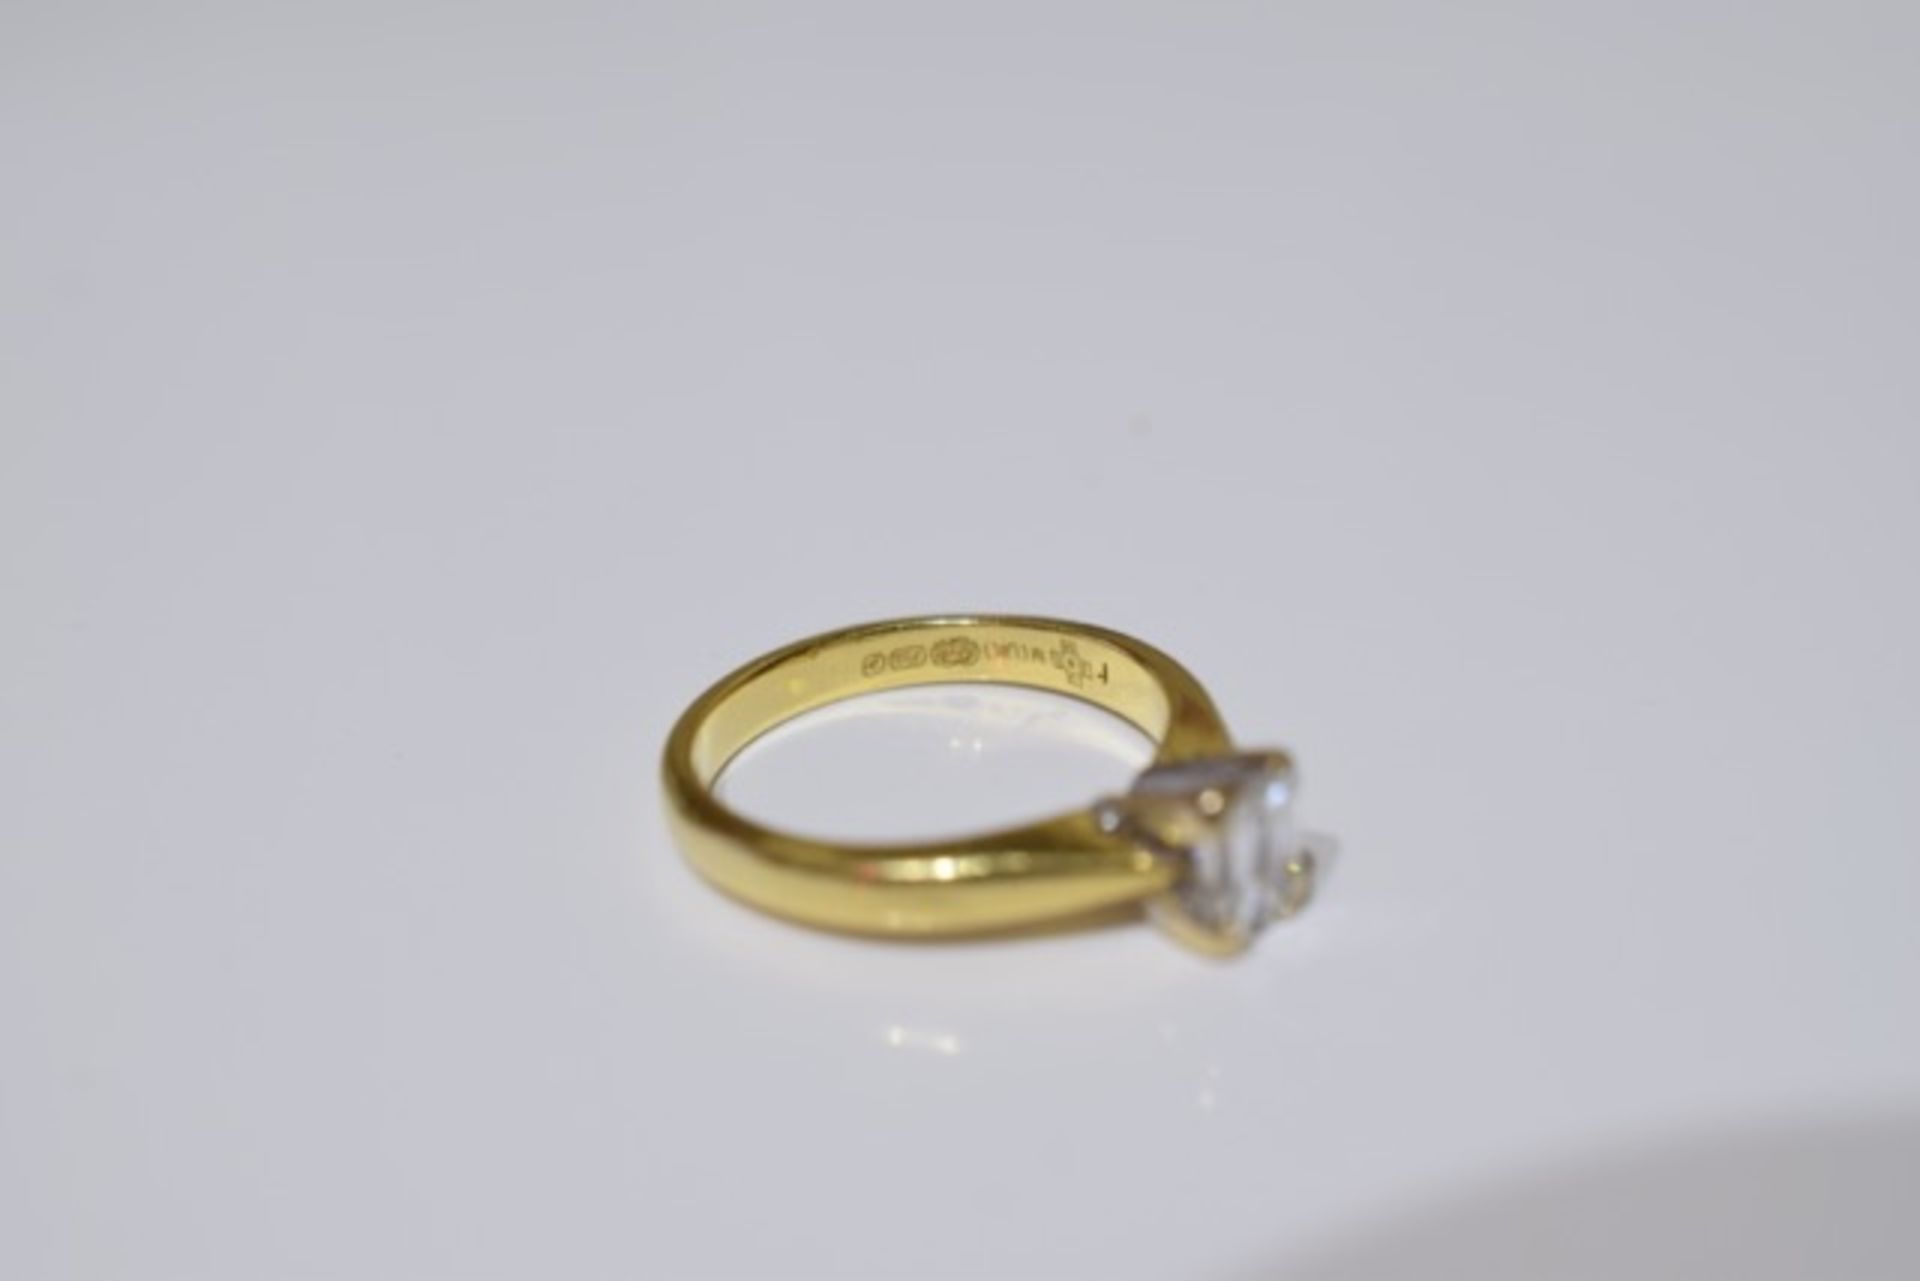 18ct Gold Emerald cut diamond ring, Size J, Clear without inclusions visible to the eye. - Image 4 of 5